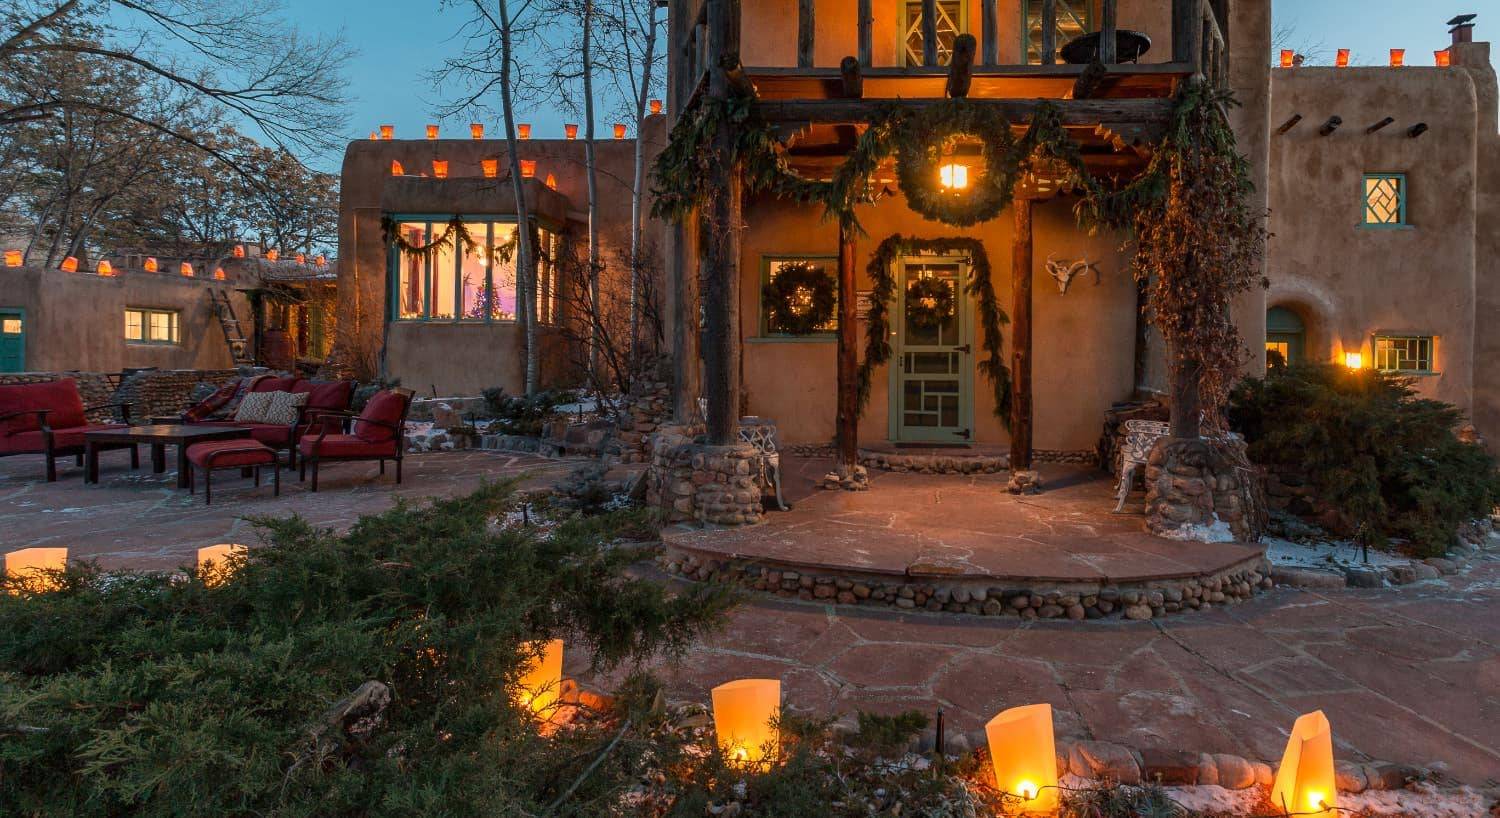 Exterior view of the property at dusk decorated for Christmas with lighted lanterns and evergreen draped on the patio